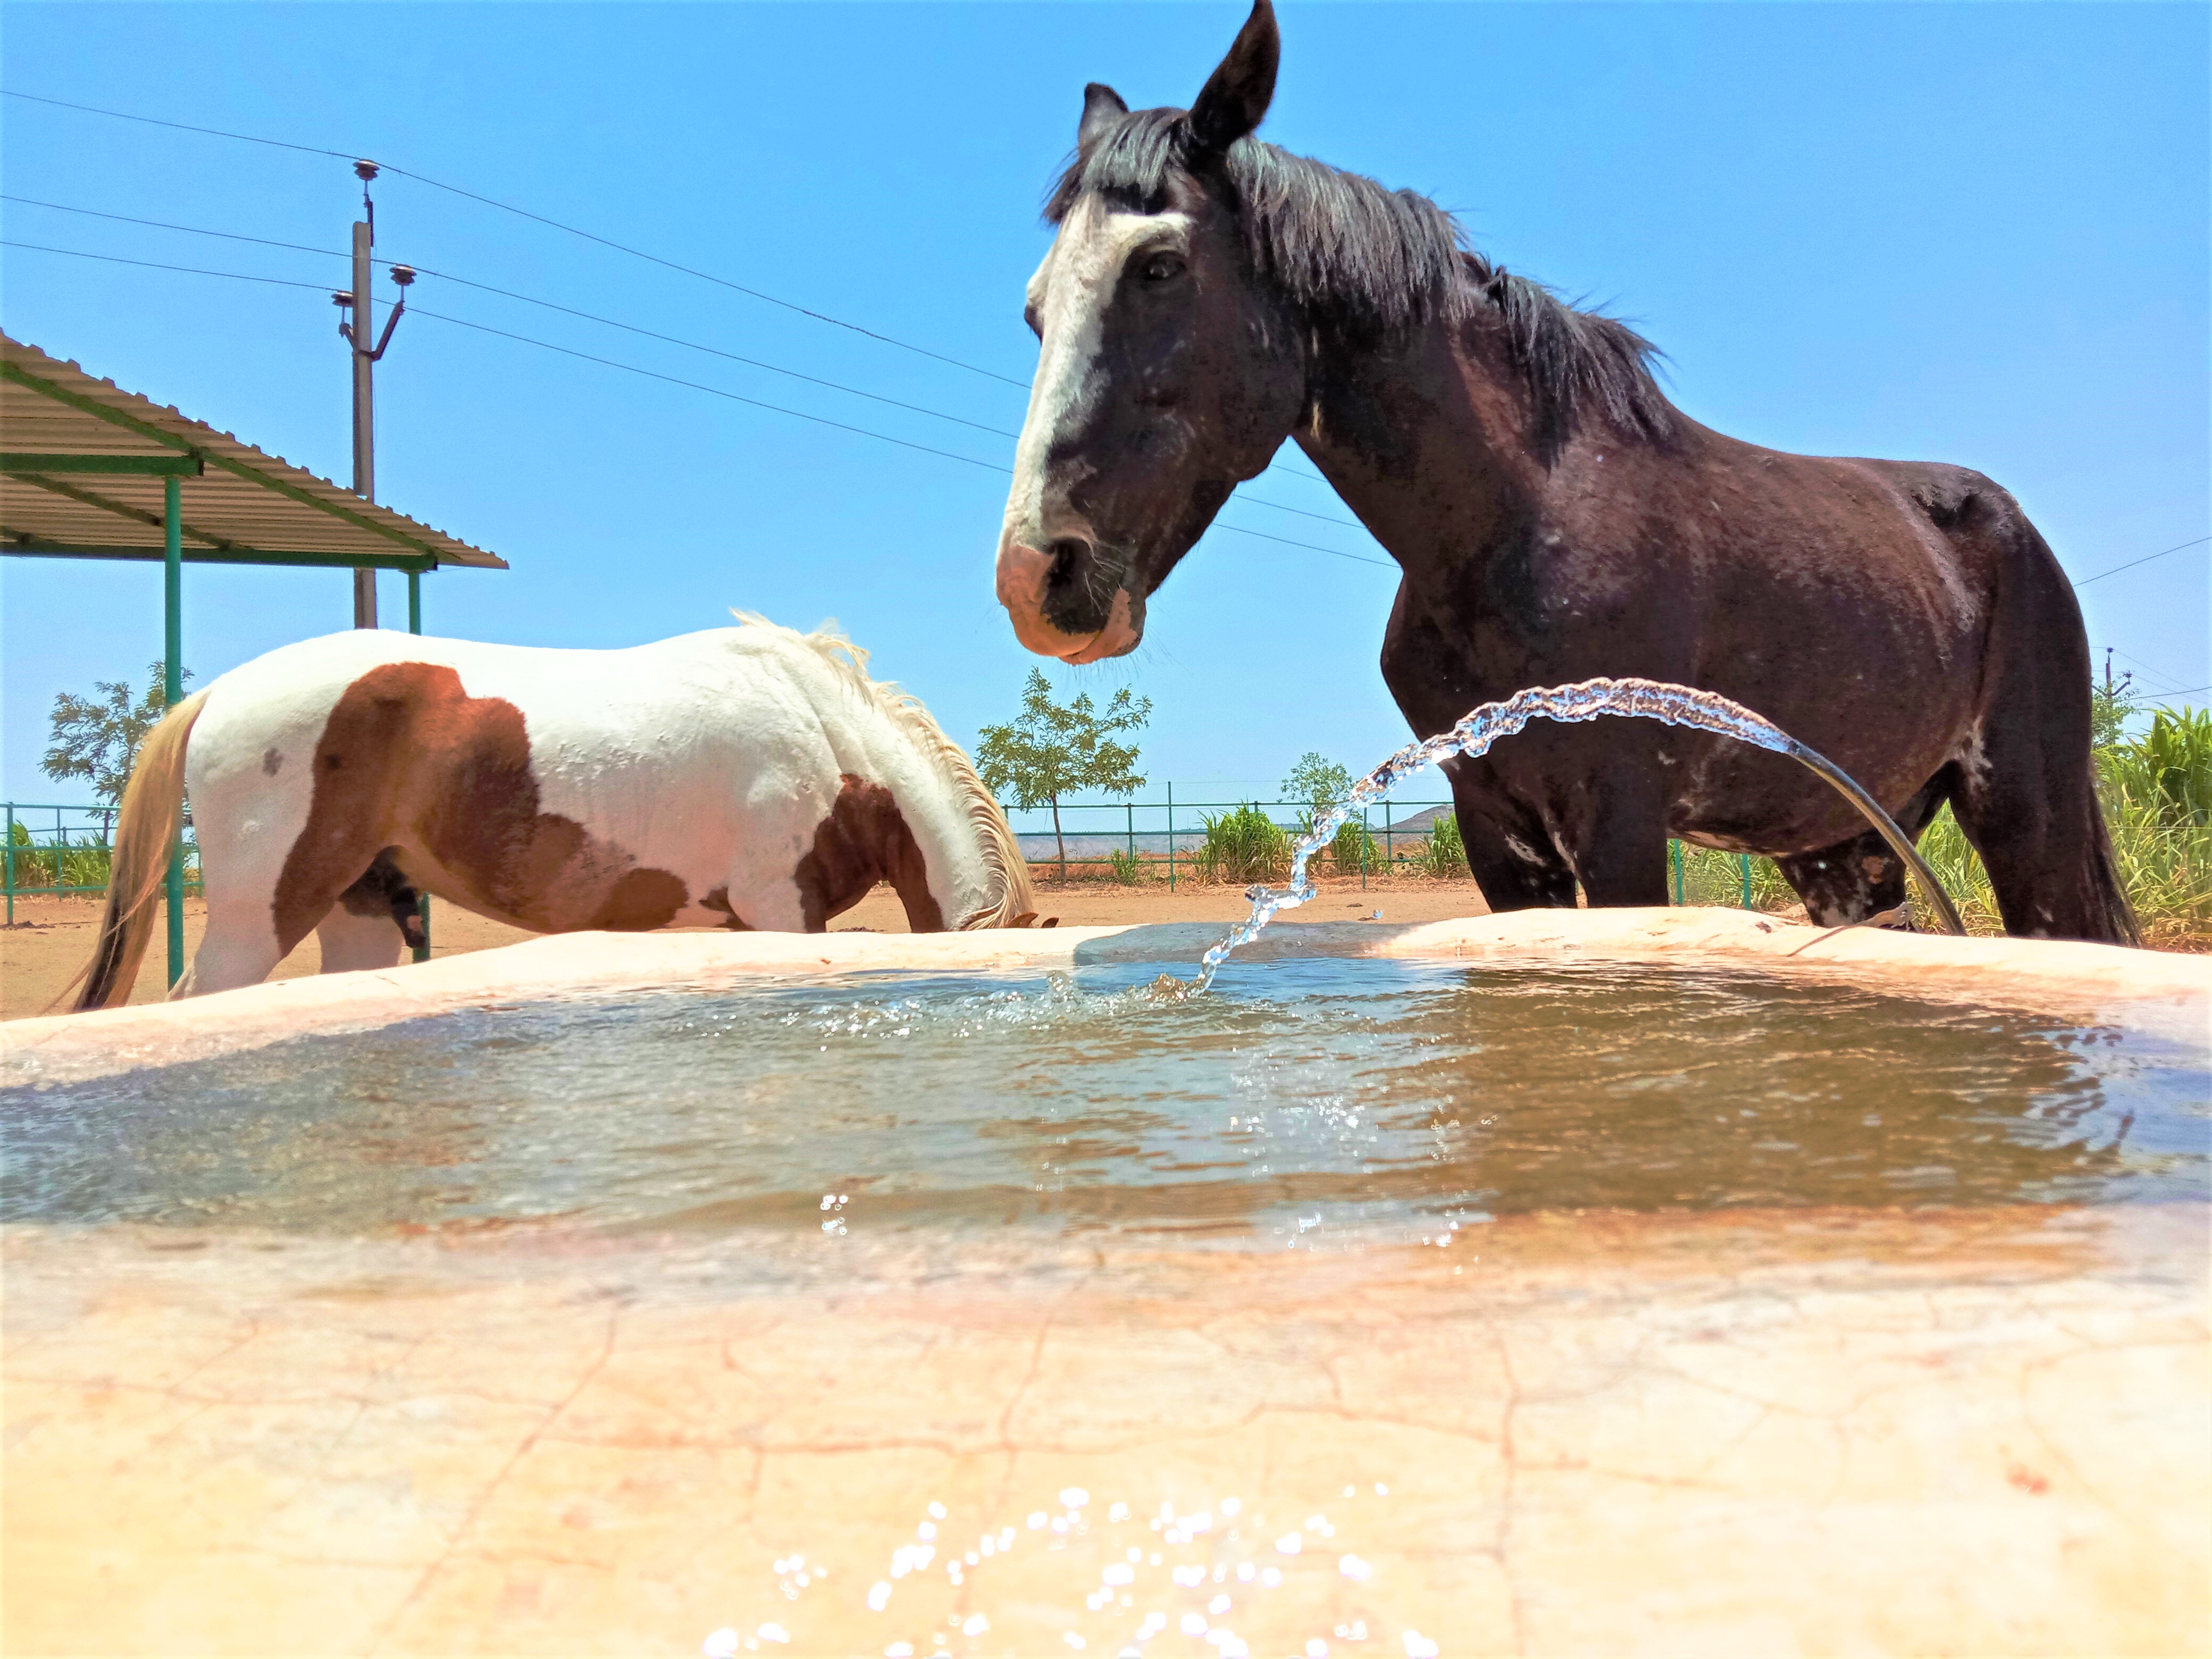 Kaliya, a brown-and-white horse, stands over a water trough that's being filled with fresh, clean water from a hose.